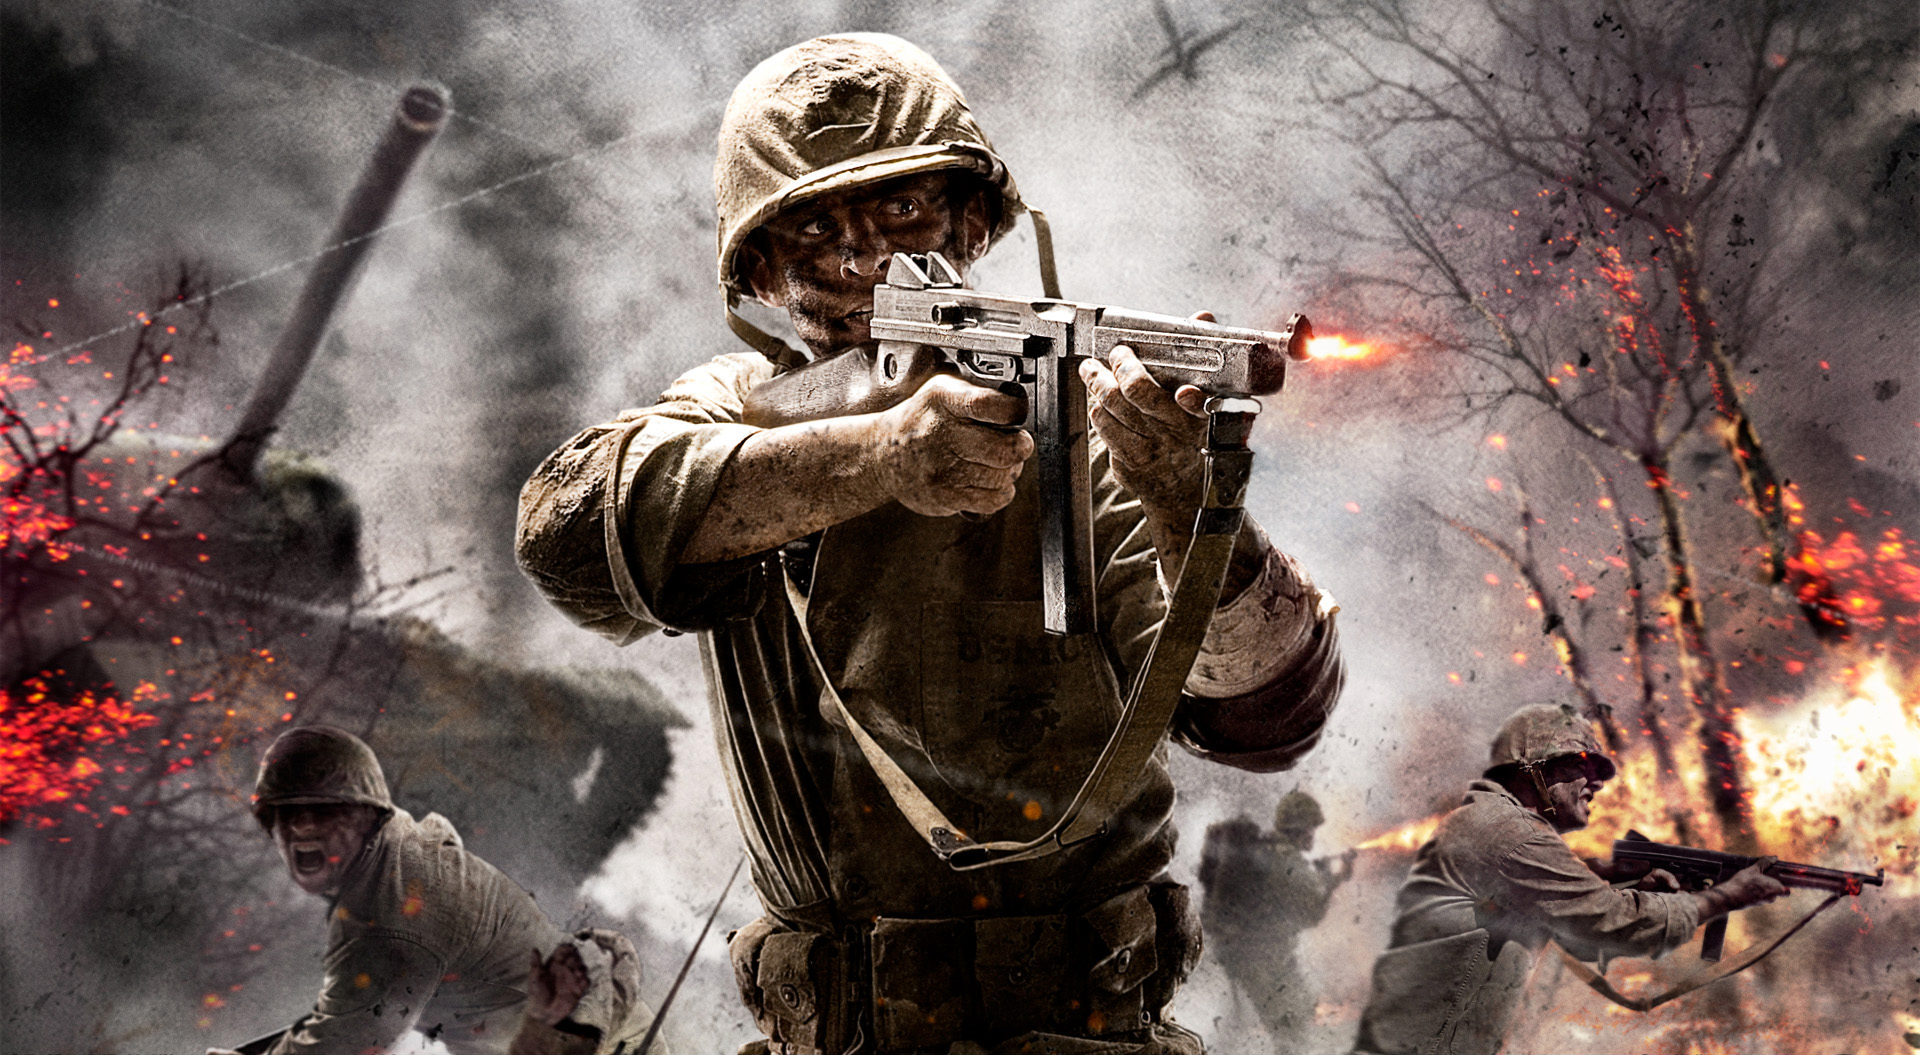 Video Game Call of Duty: World at War HD Wallpaper | Background Image